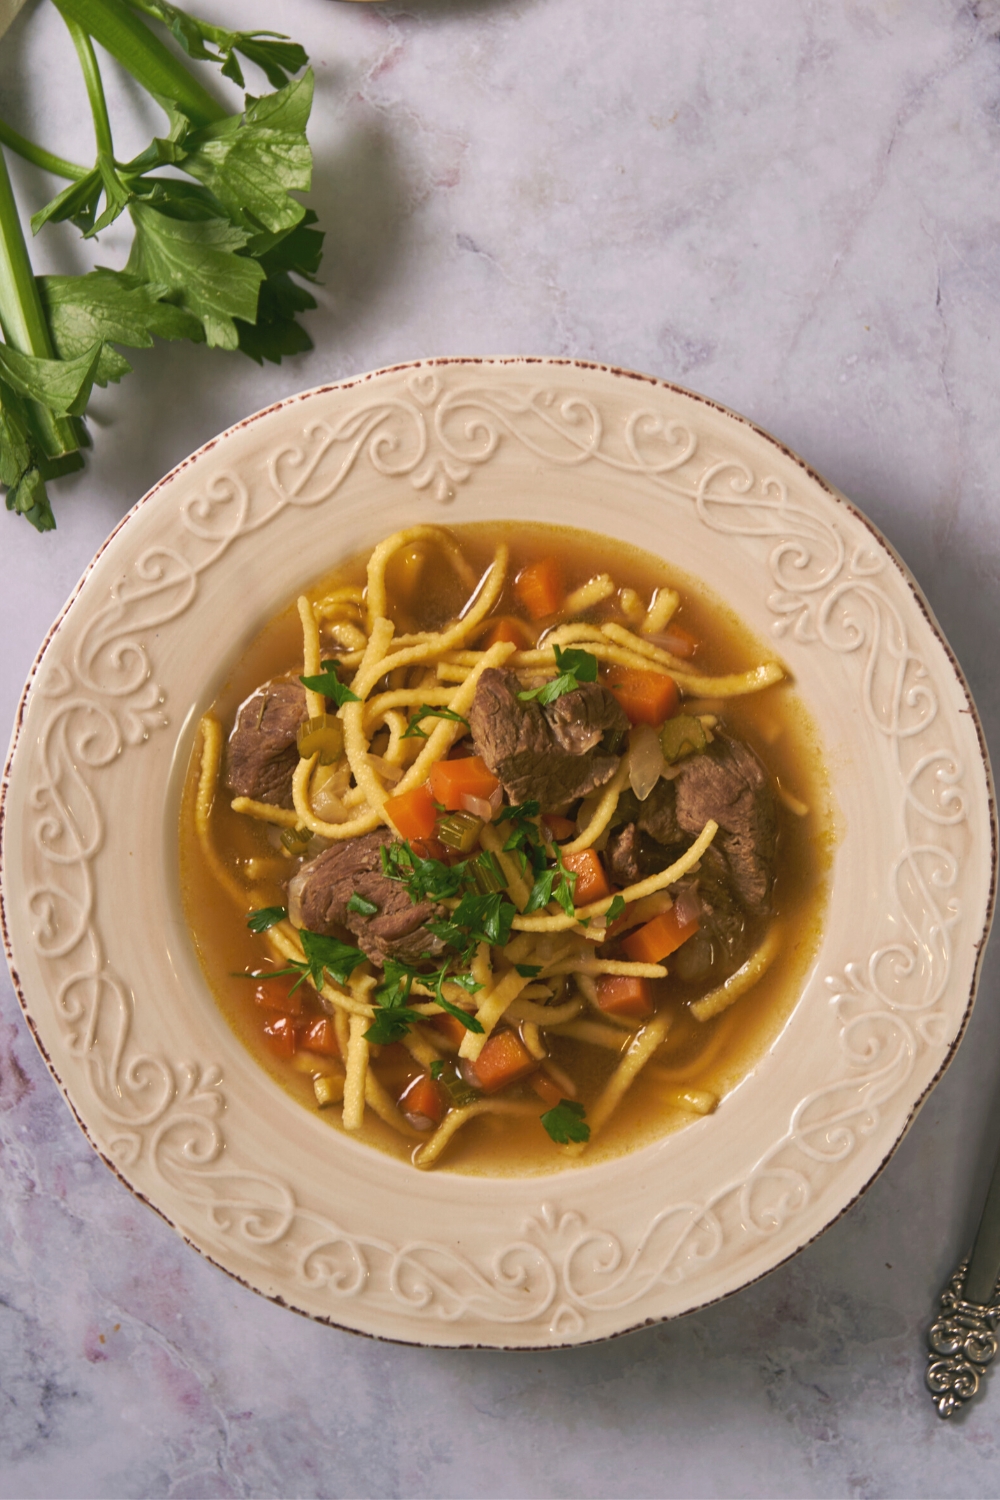 Beef cubes on top of noodles and chopped carrots in a bowl of broth.